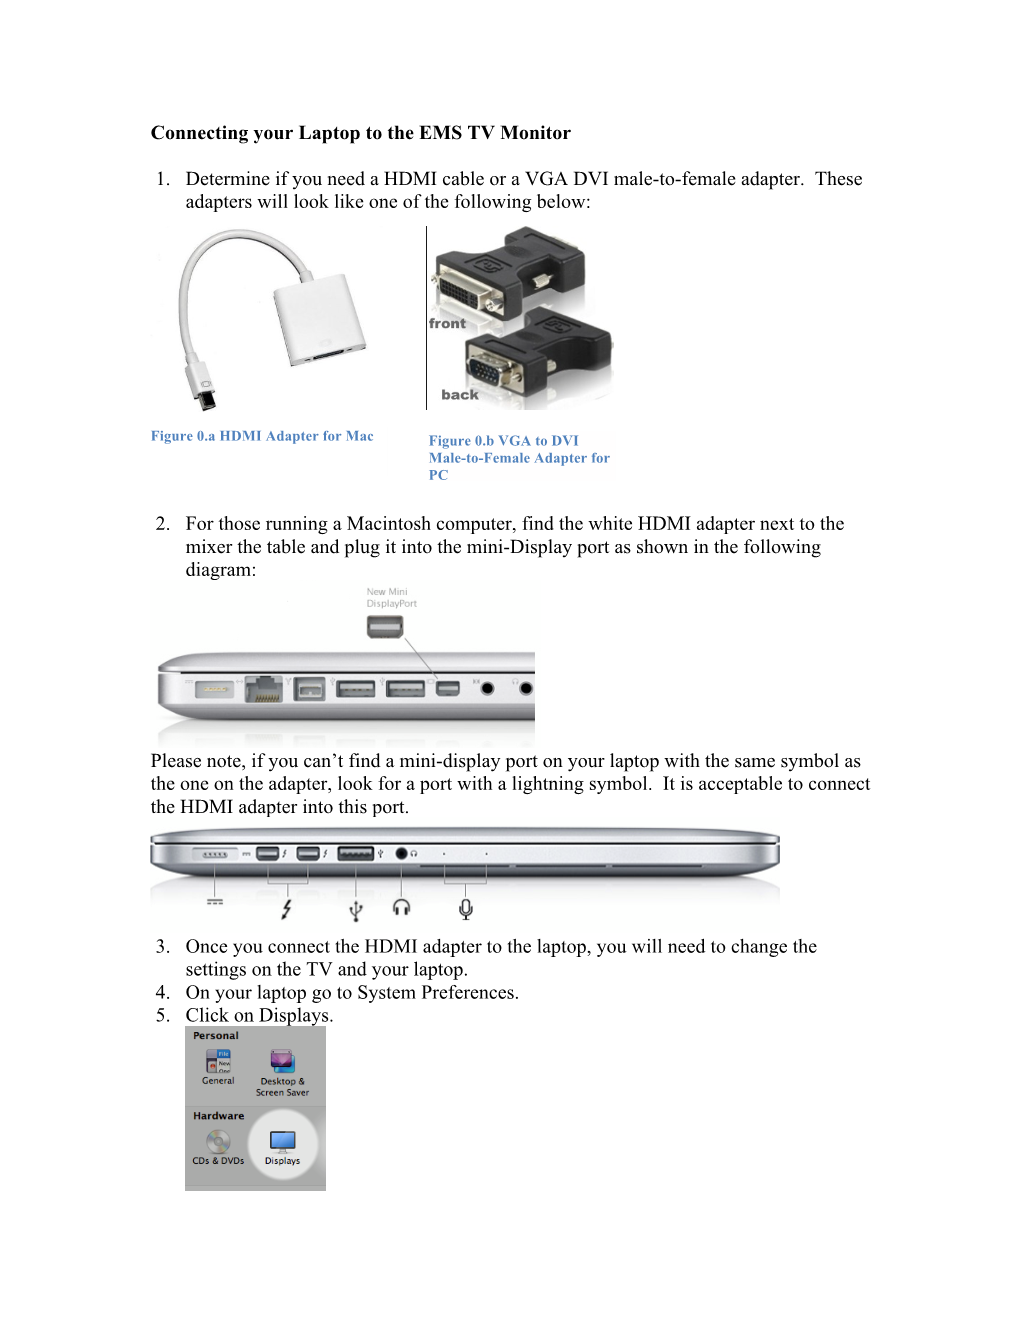 Connecting Your Laptop to the EMS TV Monitor 1. Determine If You Need a HDMI Cable Or a VGA DVI Male-To-Female Adapter. These A